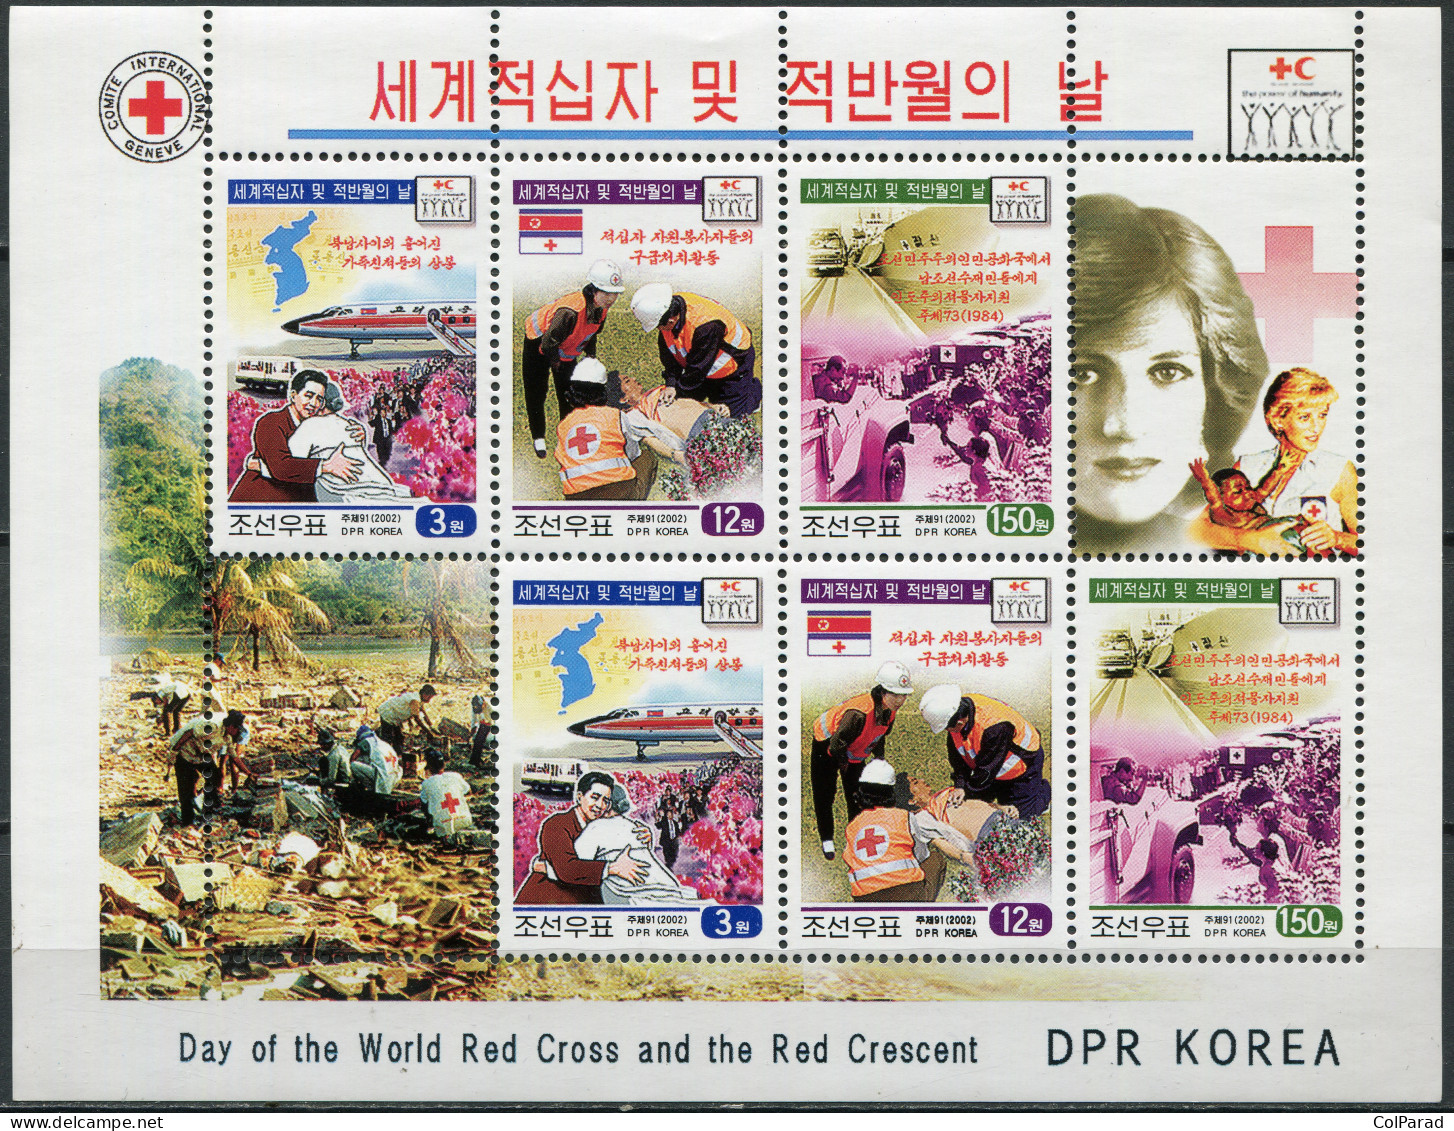 NORTH KOREA - 2002 - M/S MNH ** - Day Of The World Red Cross And Red Crescent - Korea, North